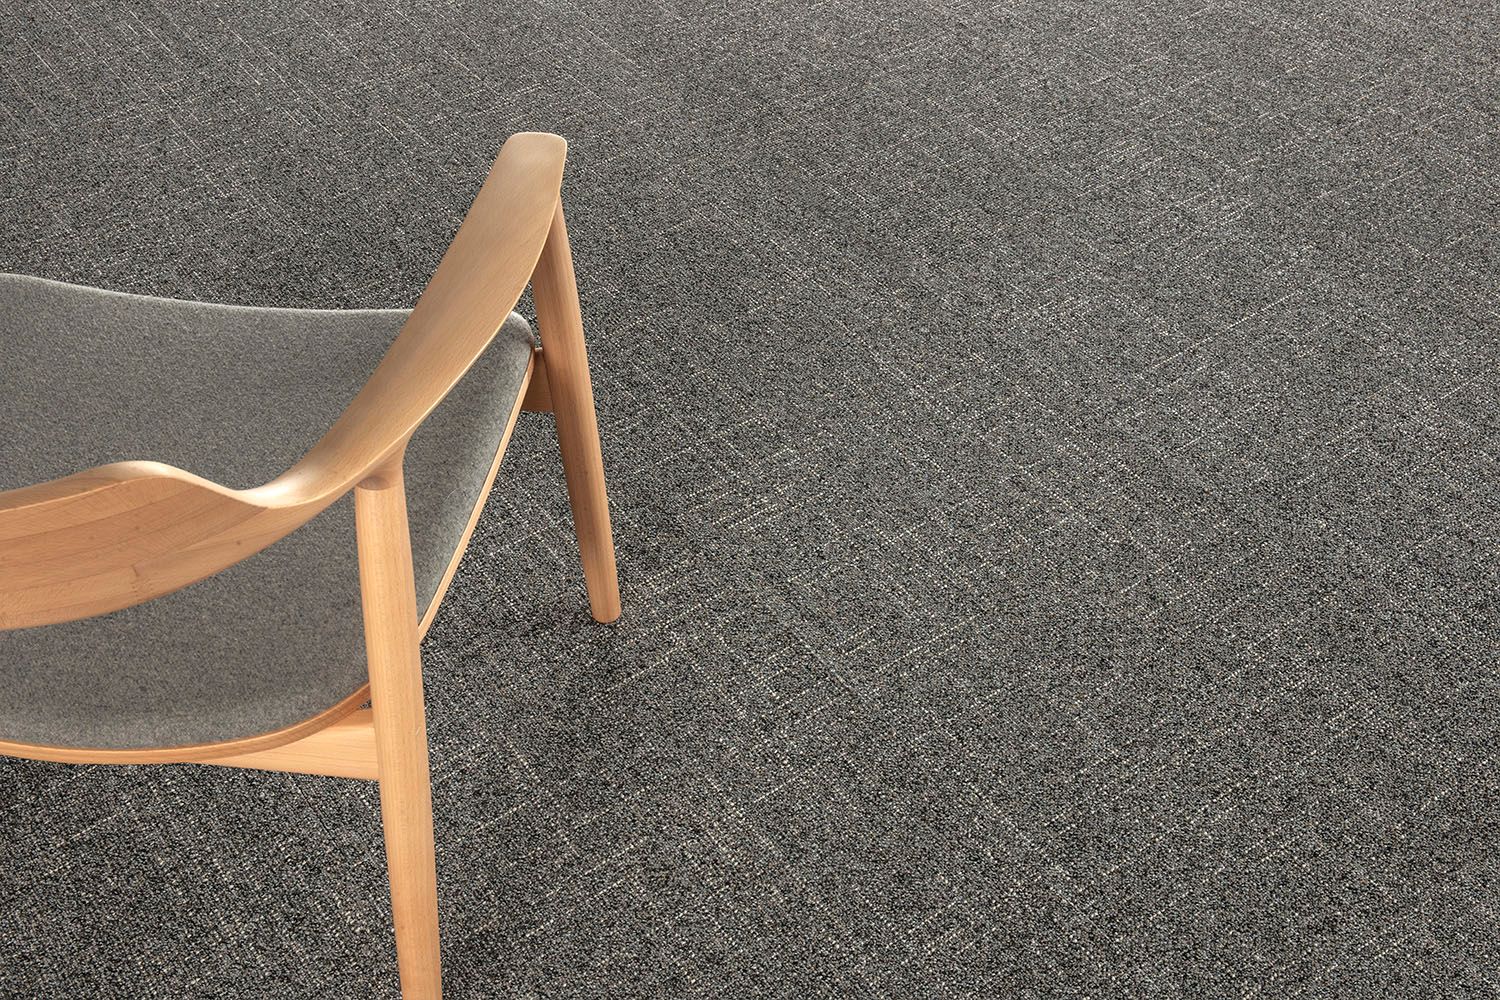 Detail image of Interface DL901 carpet tile with chair image number 2